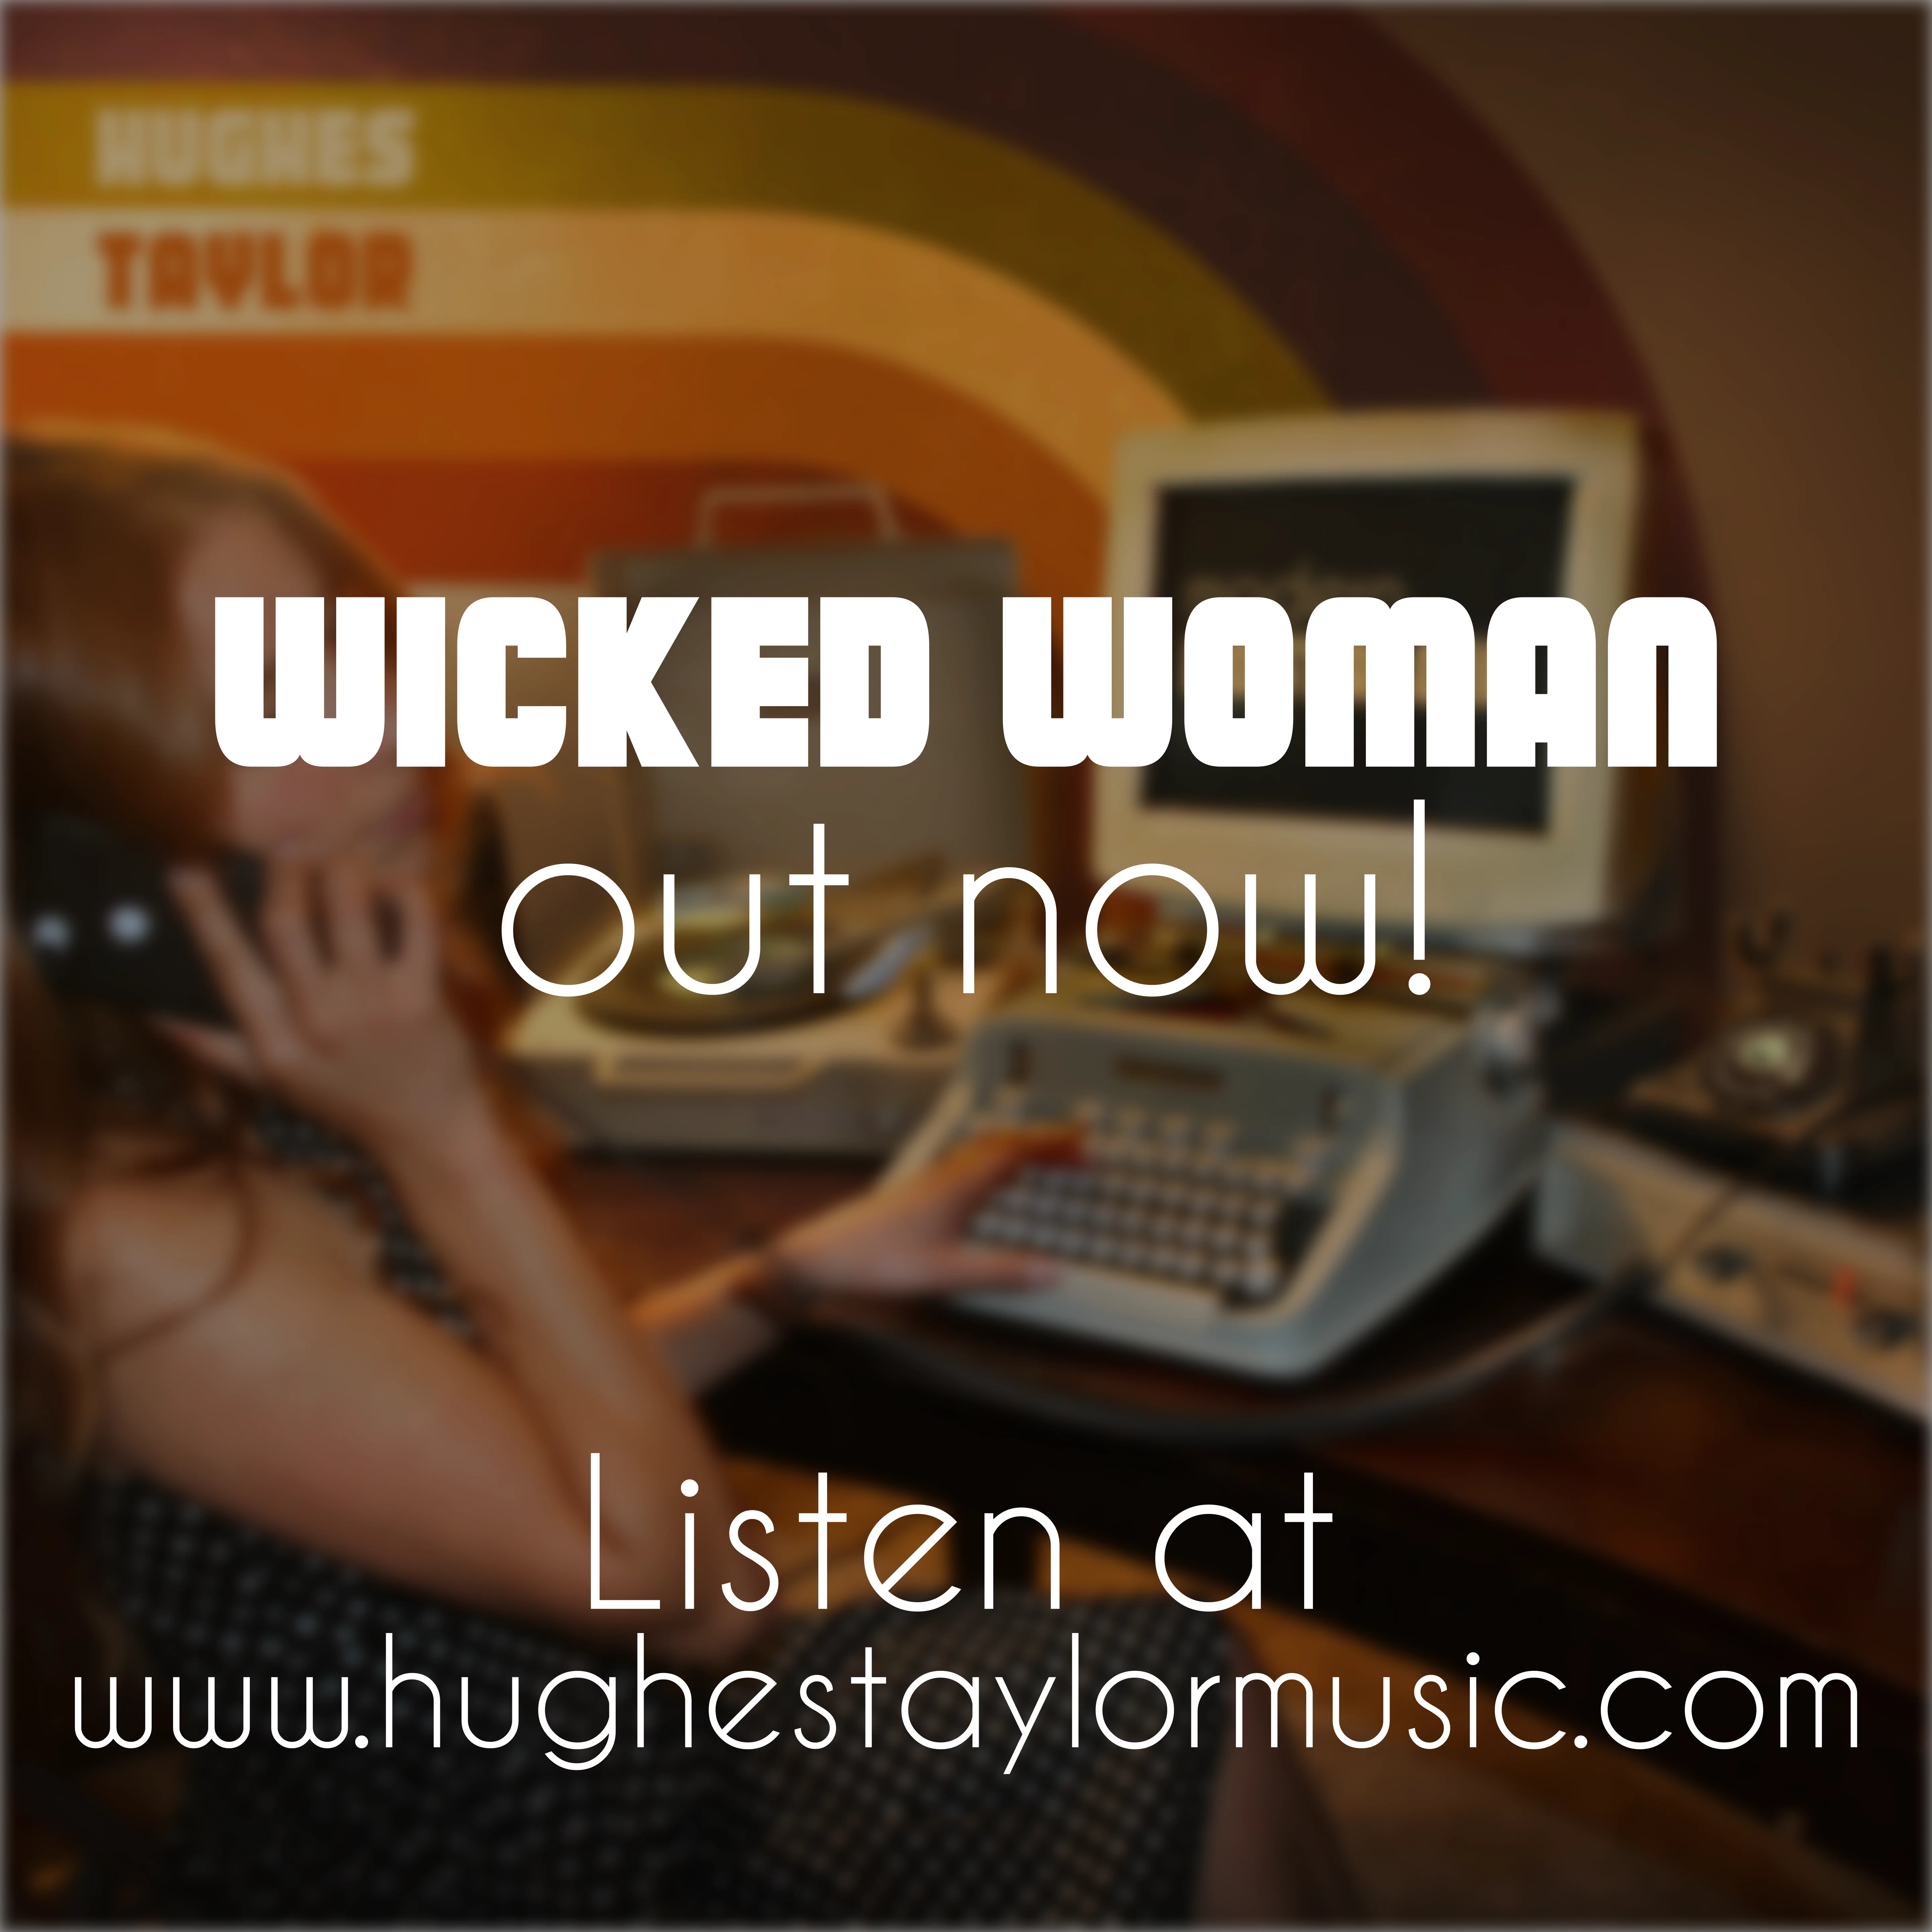 Wicked Woman is out now!